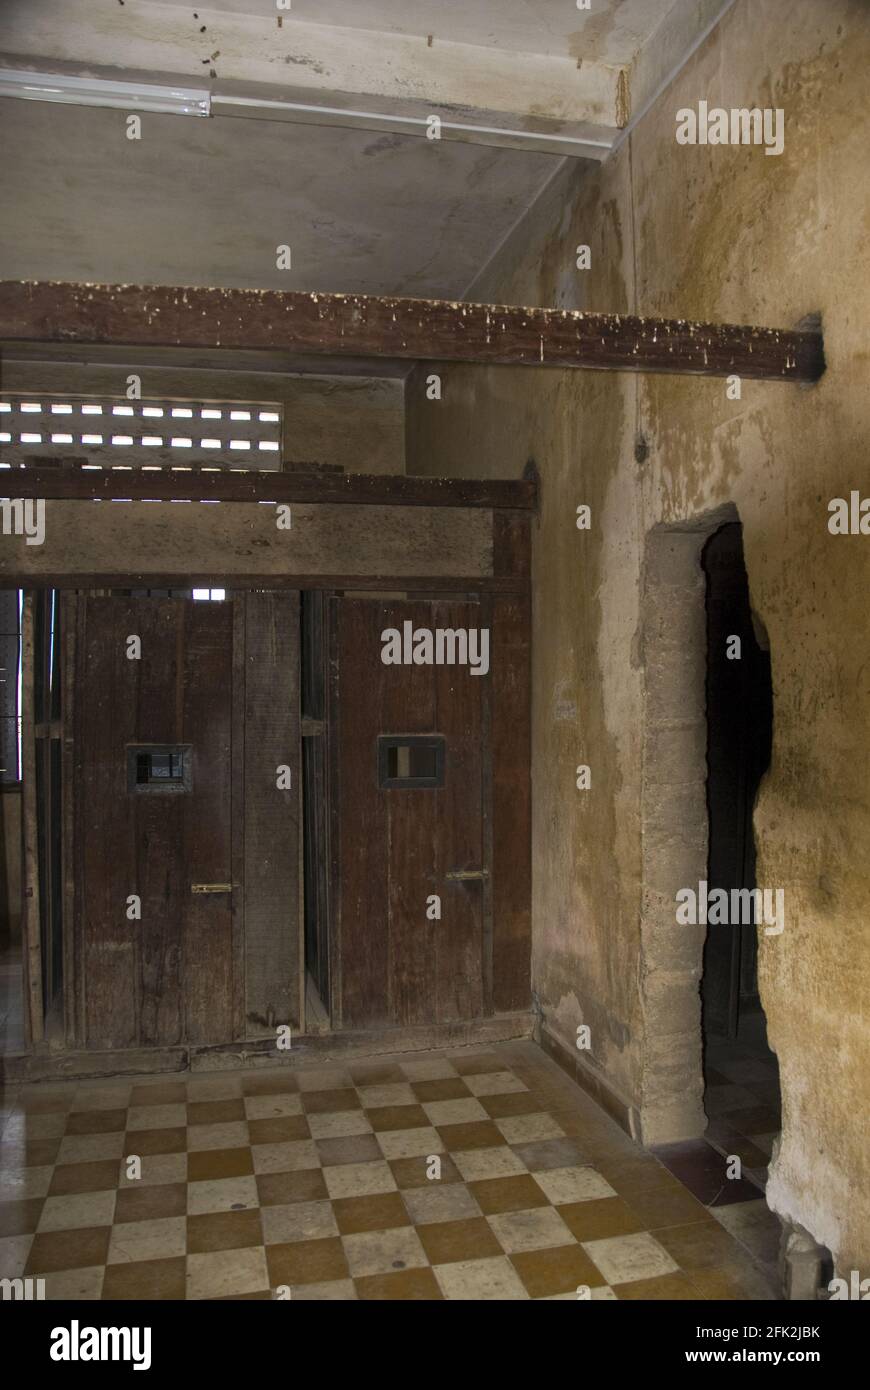 Prisoner cells at Security Prison 21, now the Tuol Sleng Genocide Museum, Phnom Penh, Cambodia. Stock Photo